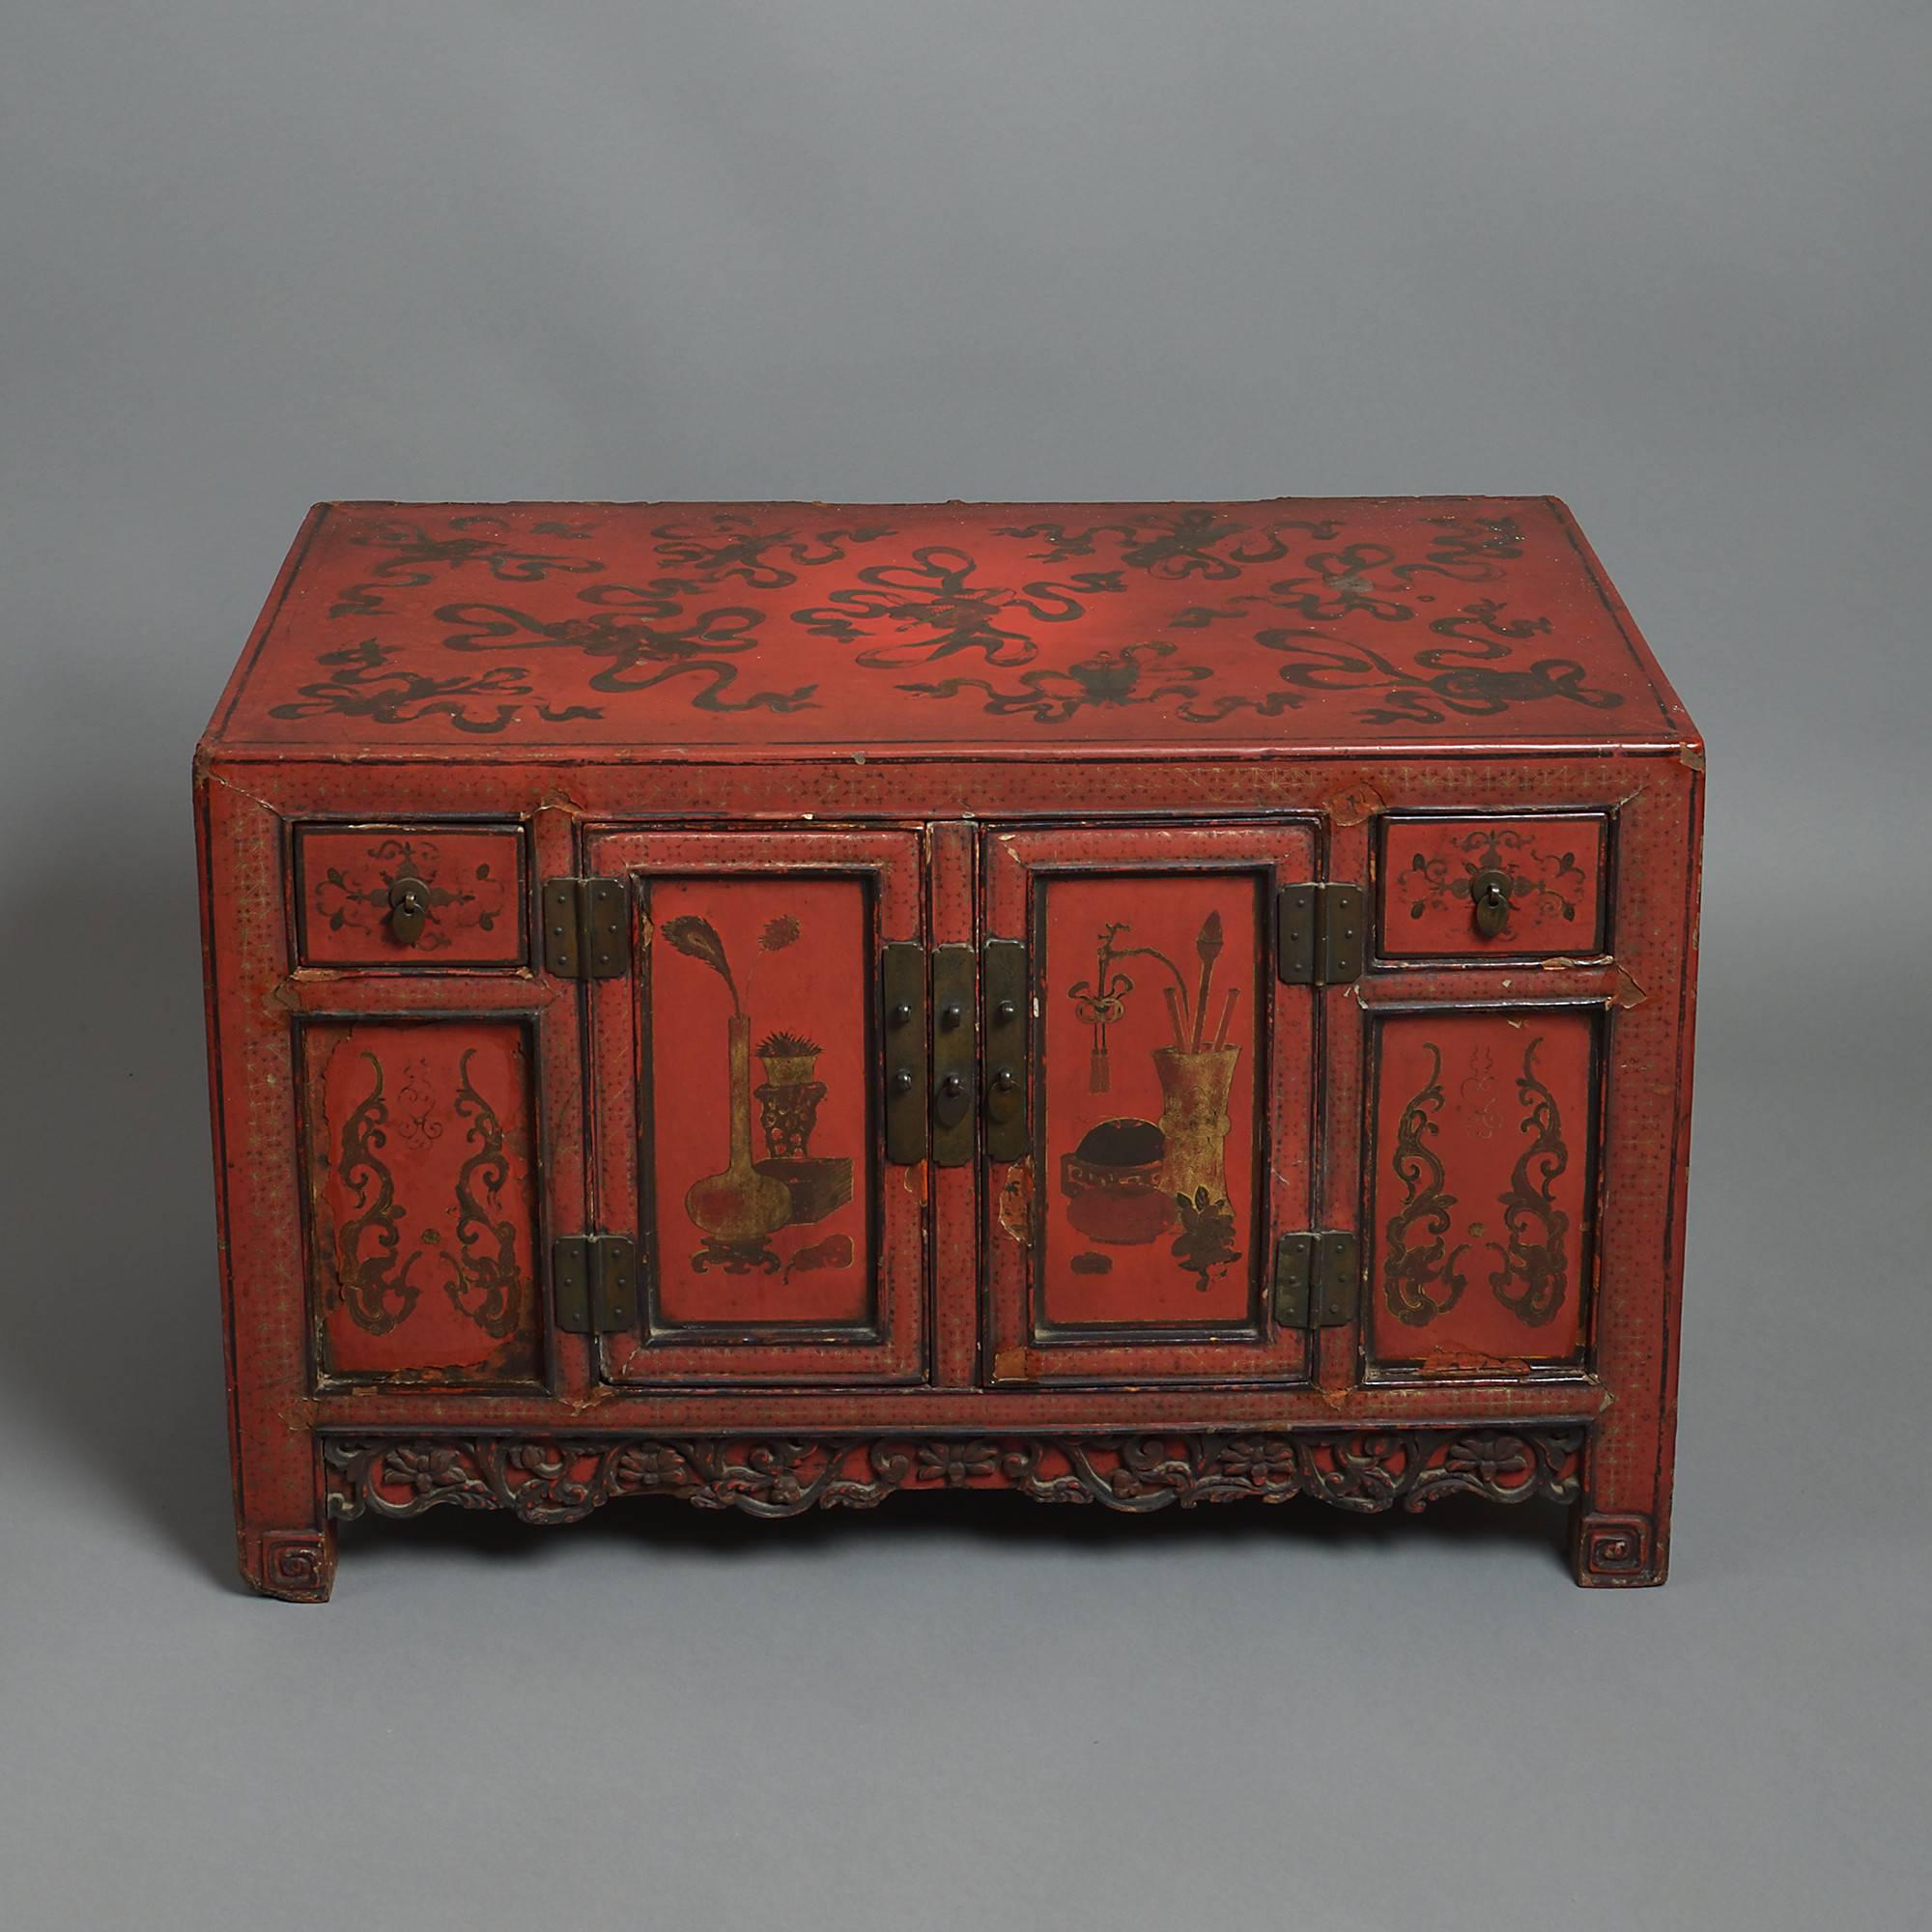 A pair of 19th century red lacquer low cabinets having each double doors and two short drawers above a carved apron and scrolling stile feet, the surfaces profusely decorated with stylised floral and foliate designs, the central panels with vases